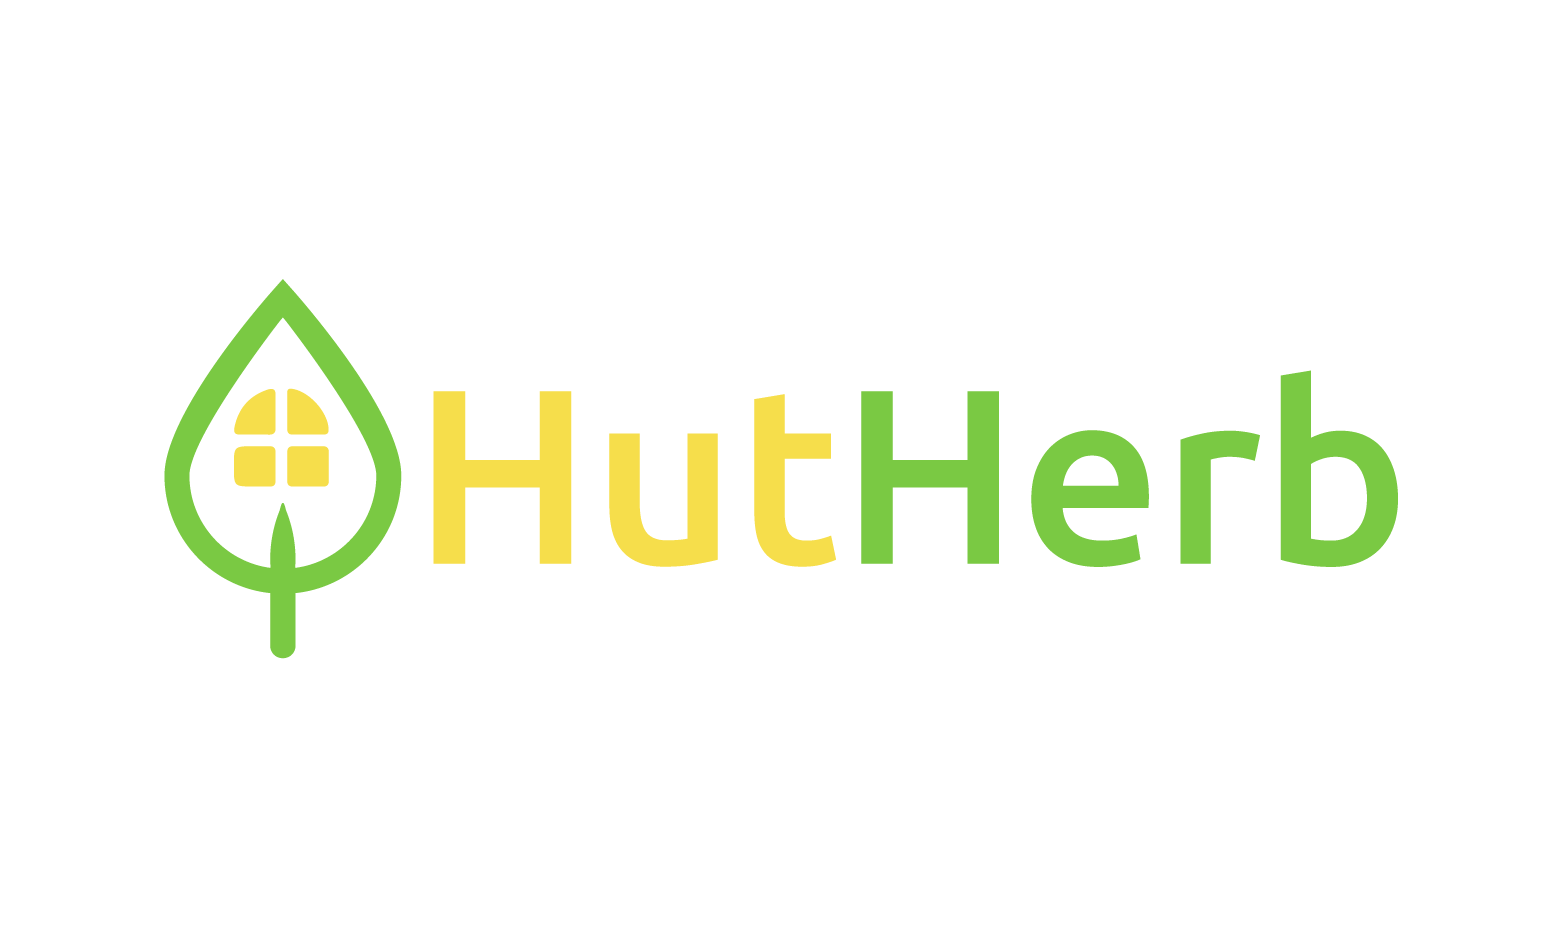 HutHerb.com - Creative brandable domain for sale